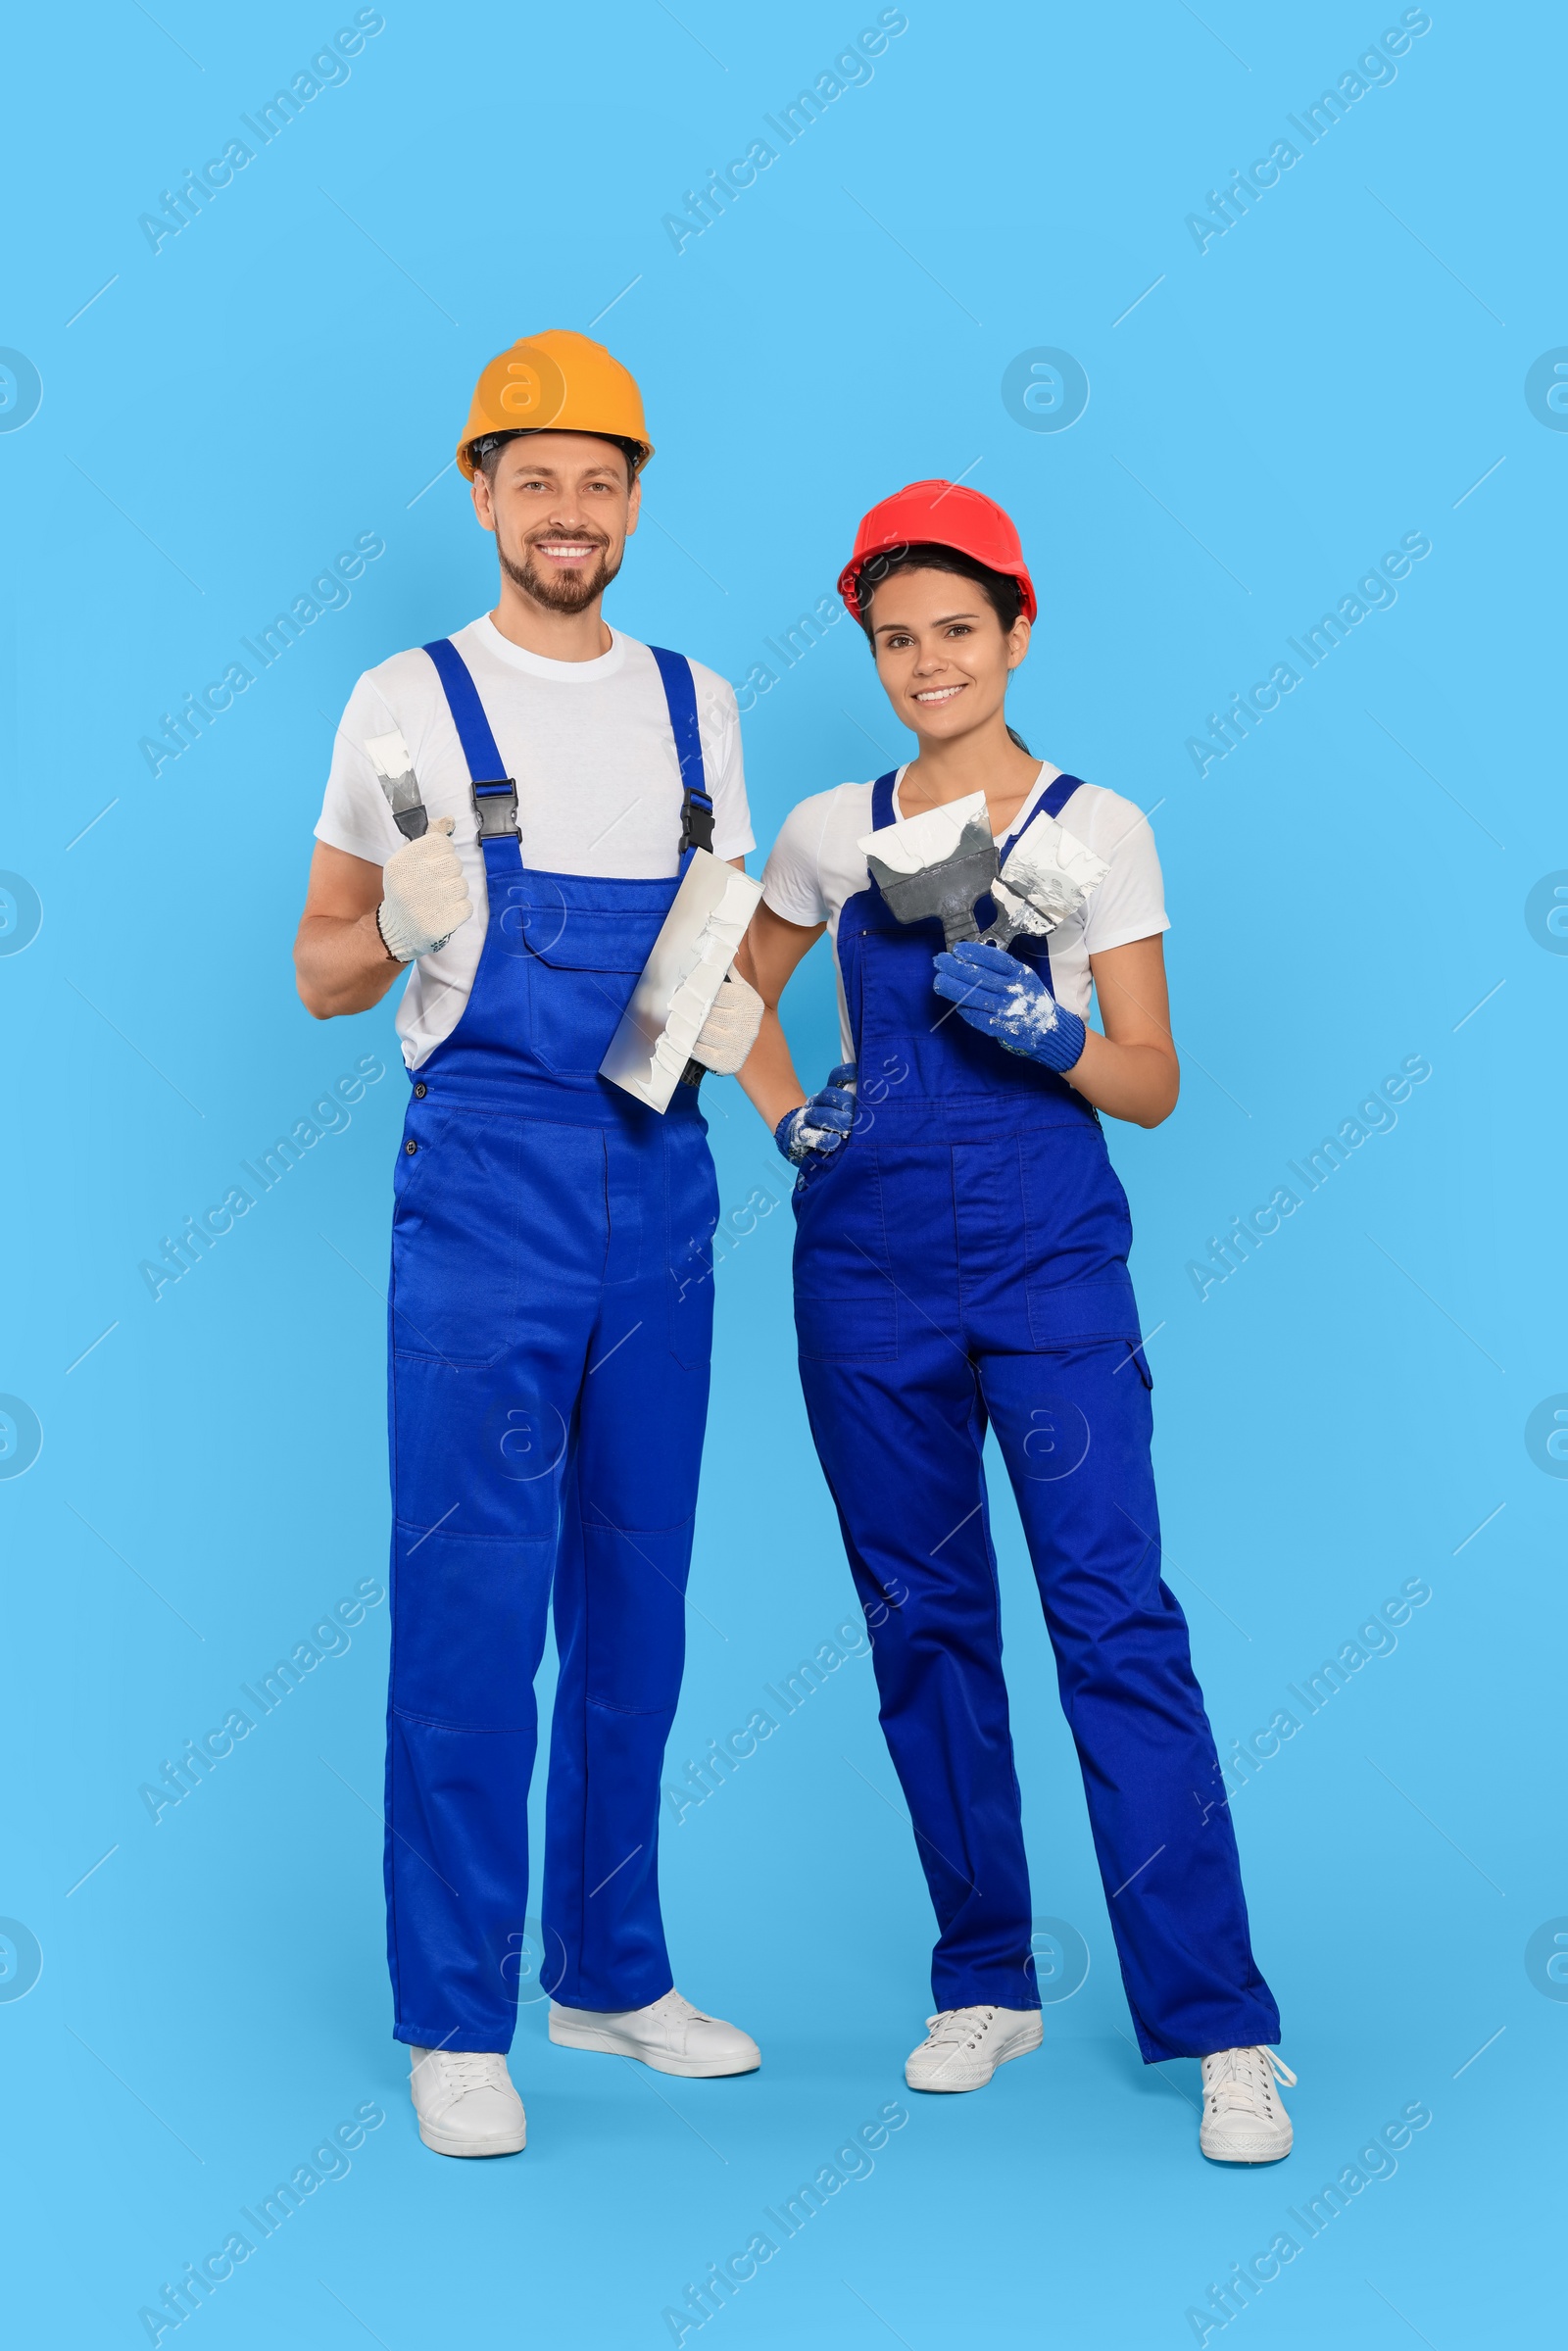 Photo of Professional workers with putty knives in hard hats on light blue background